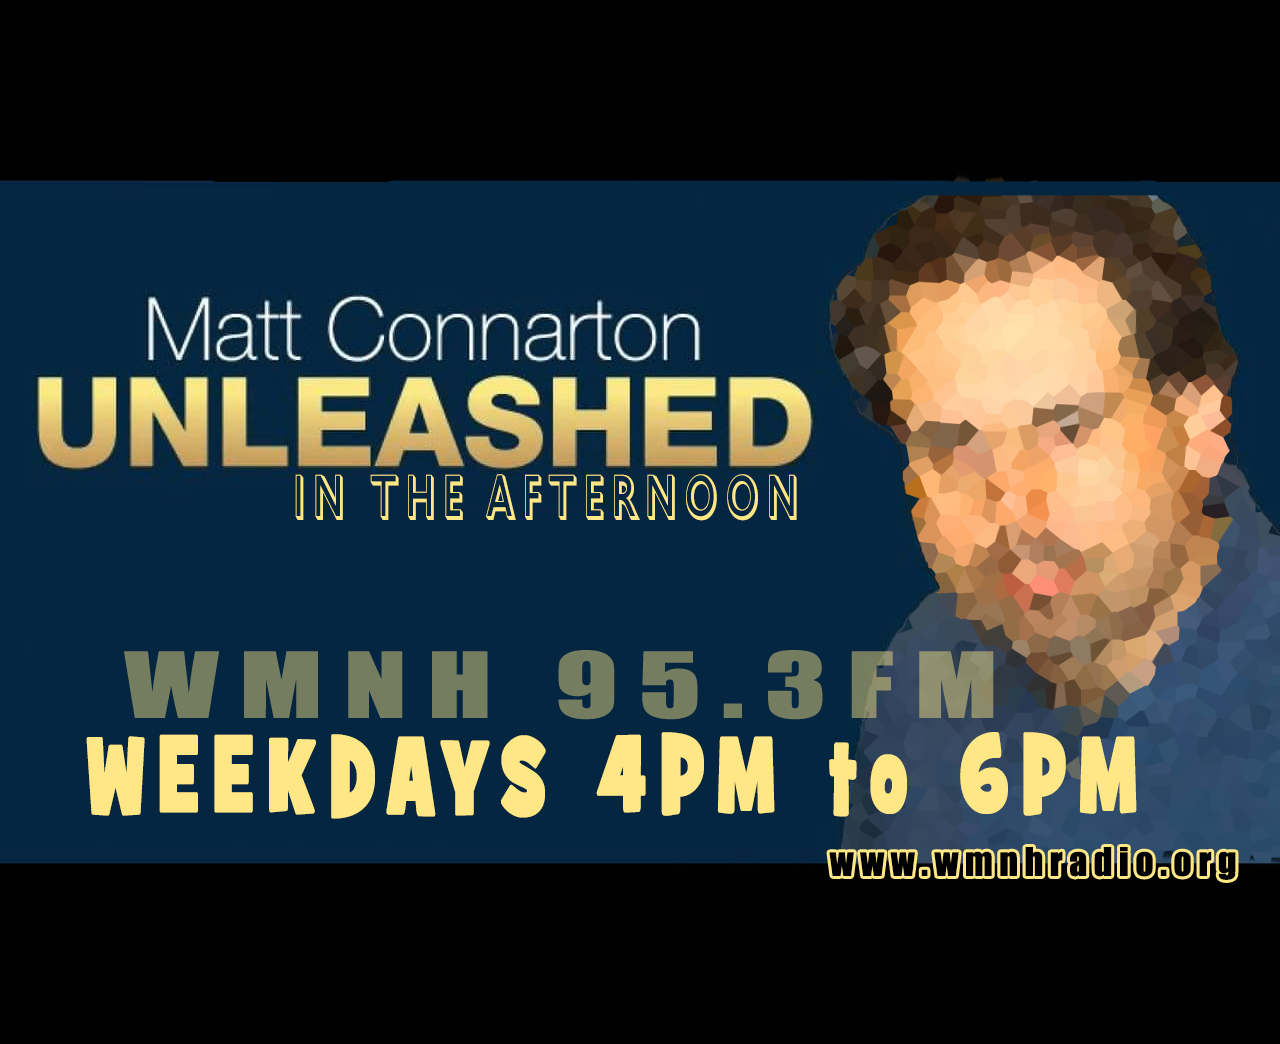 Matt Connarton Unleashed in the Afternoon 8-18-17